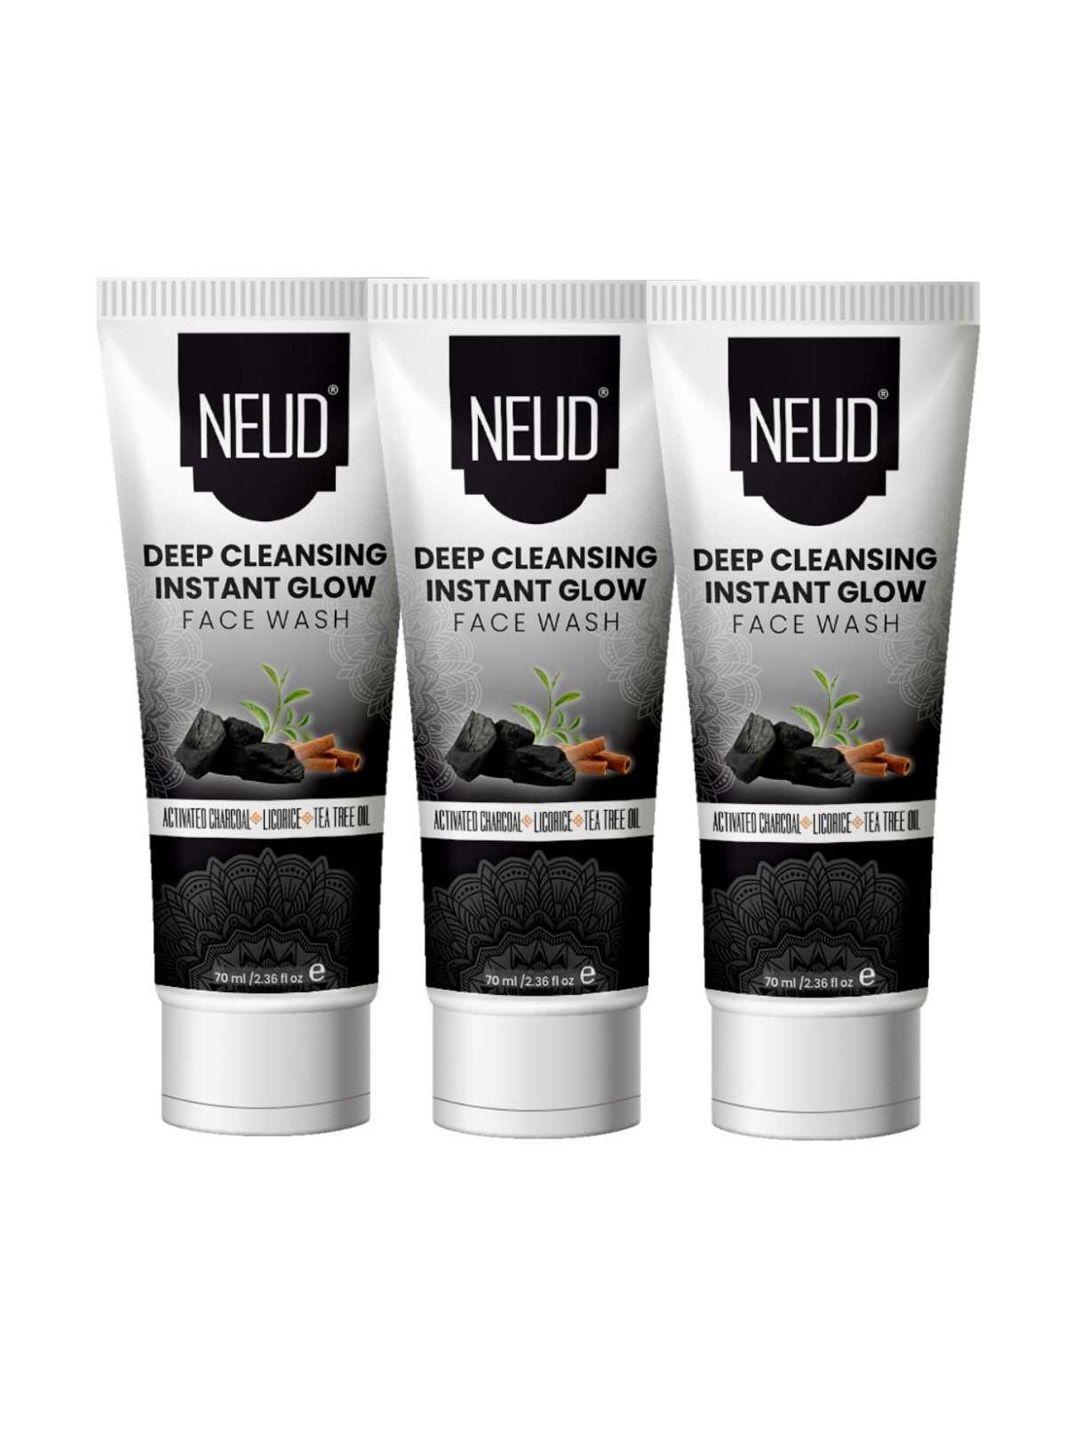 neud deep cleansing instant glow set of 3 face wash 70 ml each